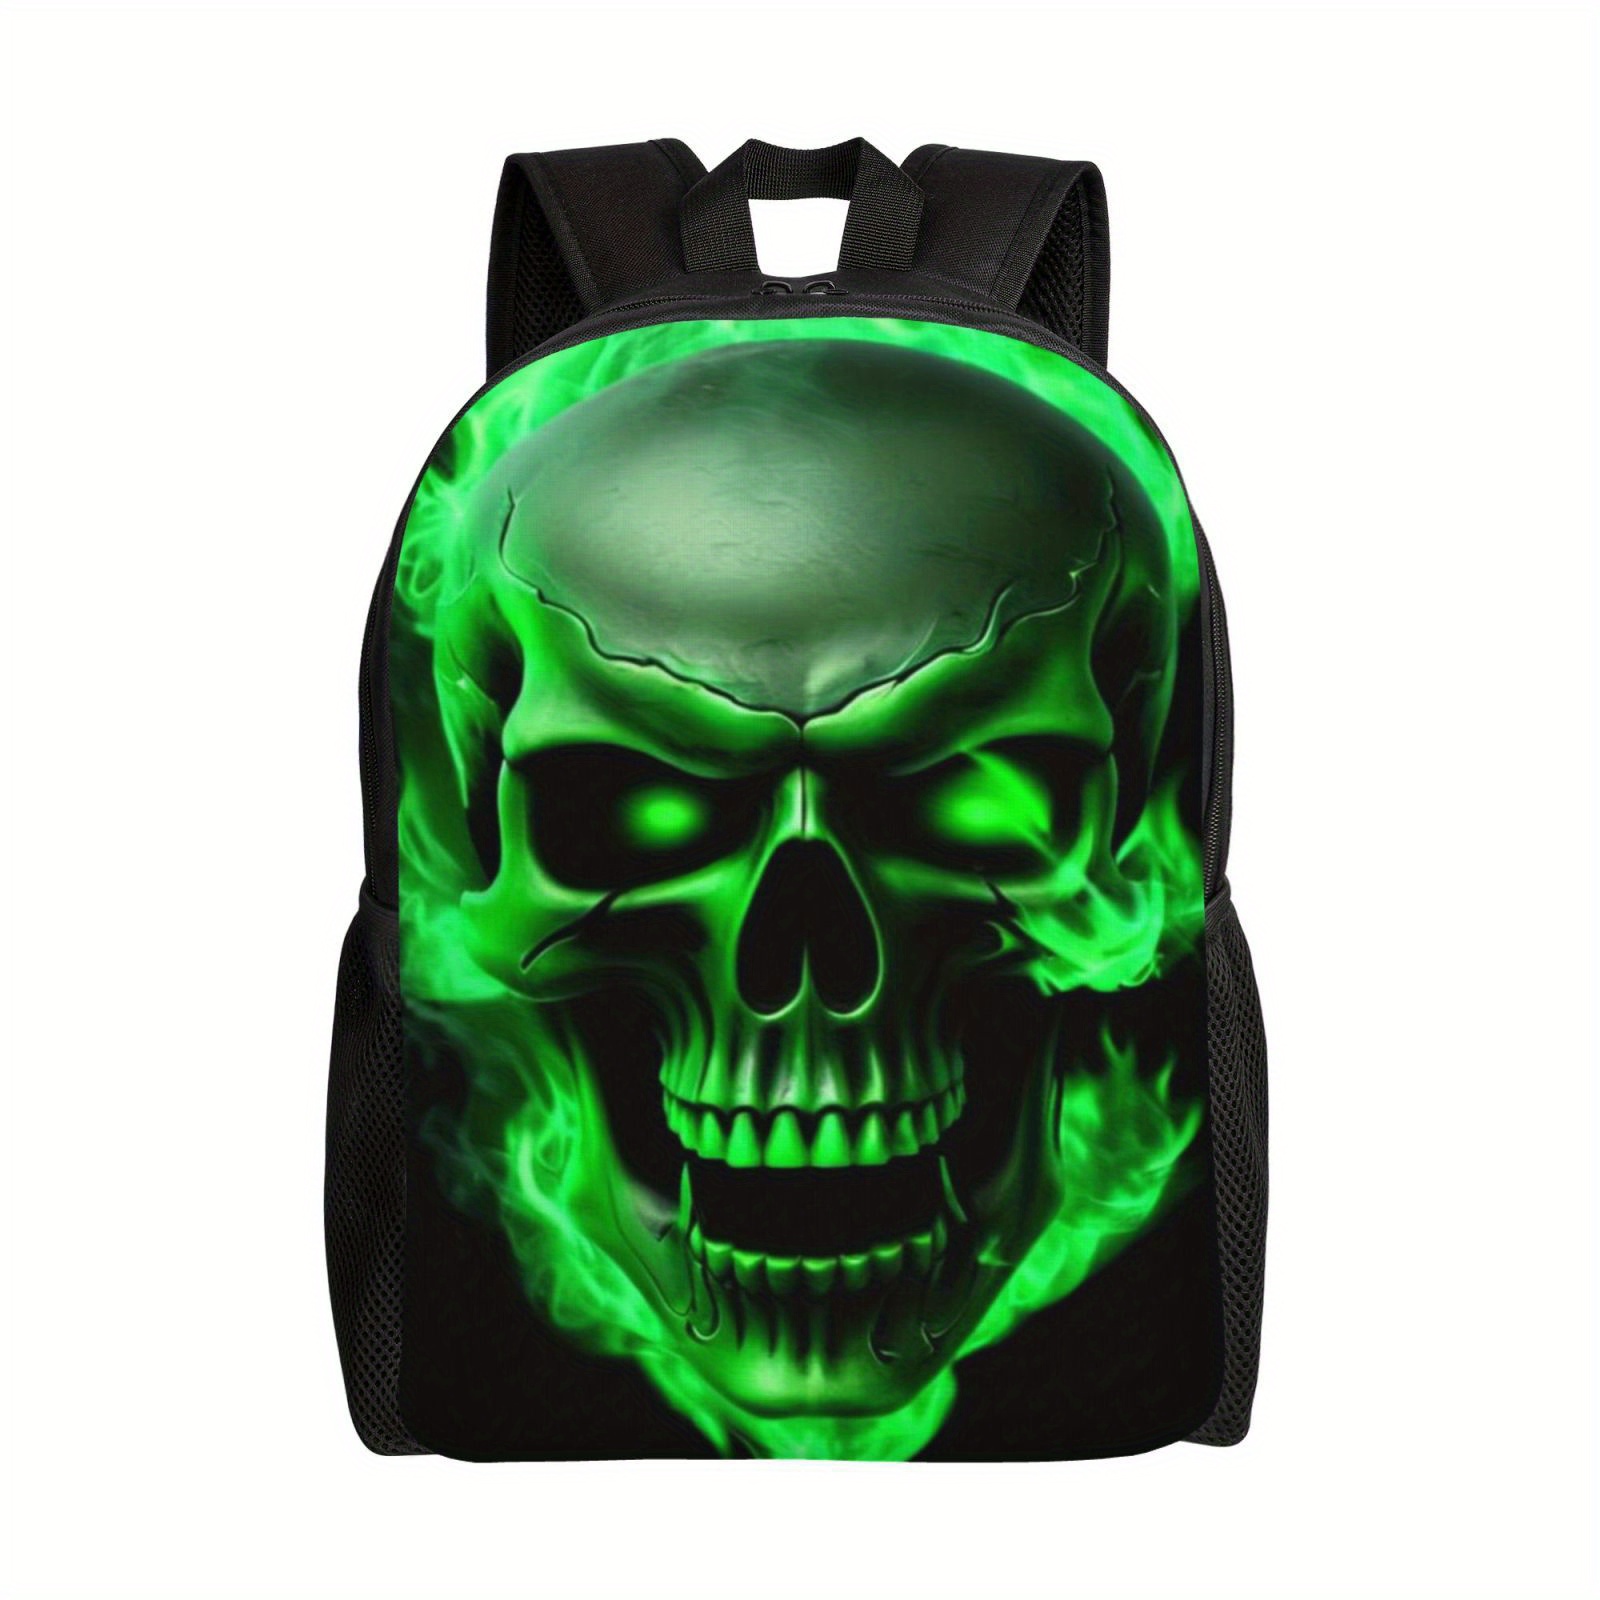 

Green Scary Skull Casual Backpack, Lightweight Shoulder Bag For Men And Women, Large Capacity Computer Laptop Bag Book Bag For Work Travel Office College